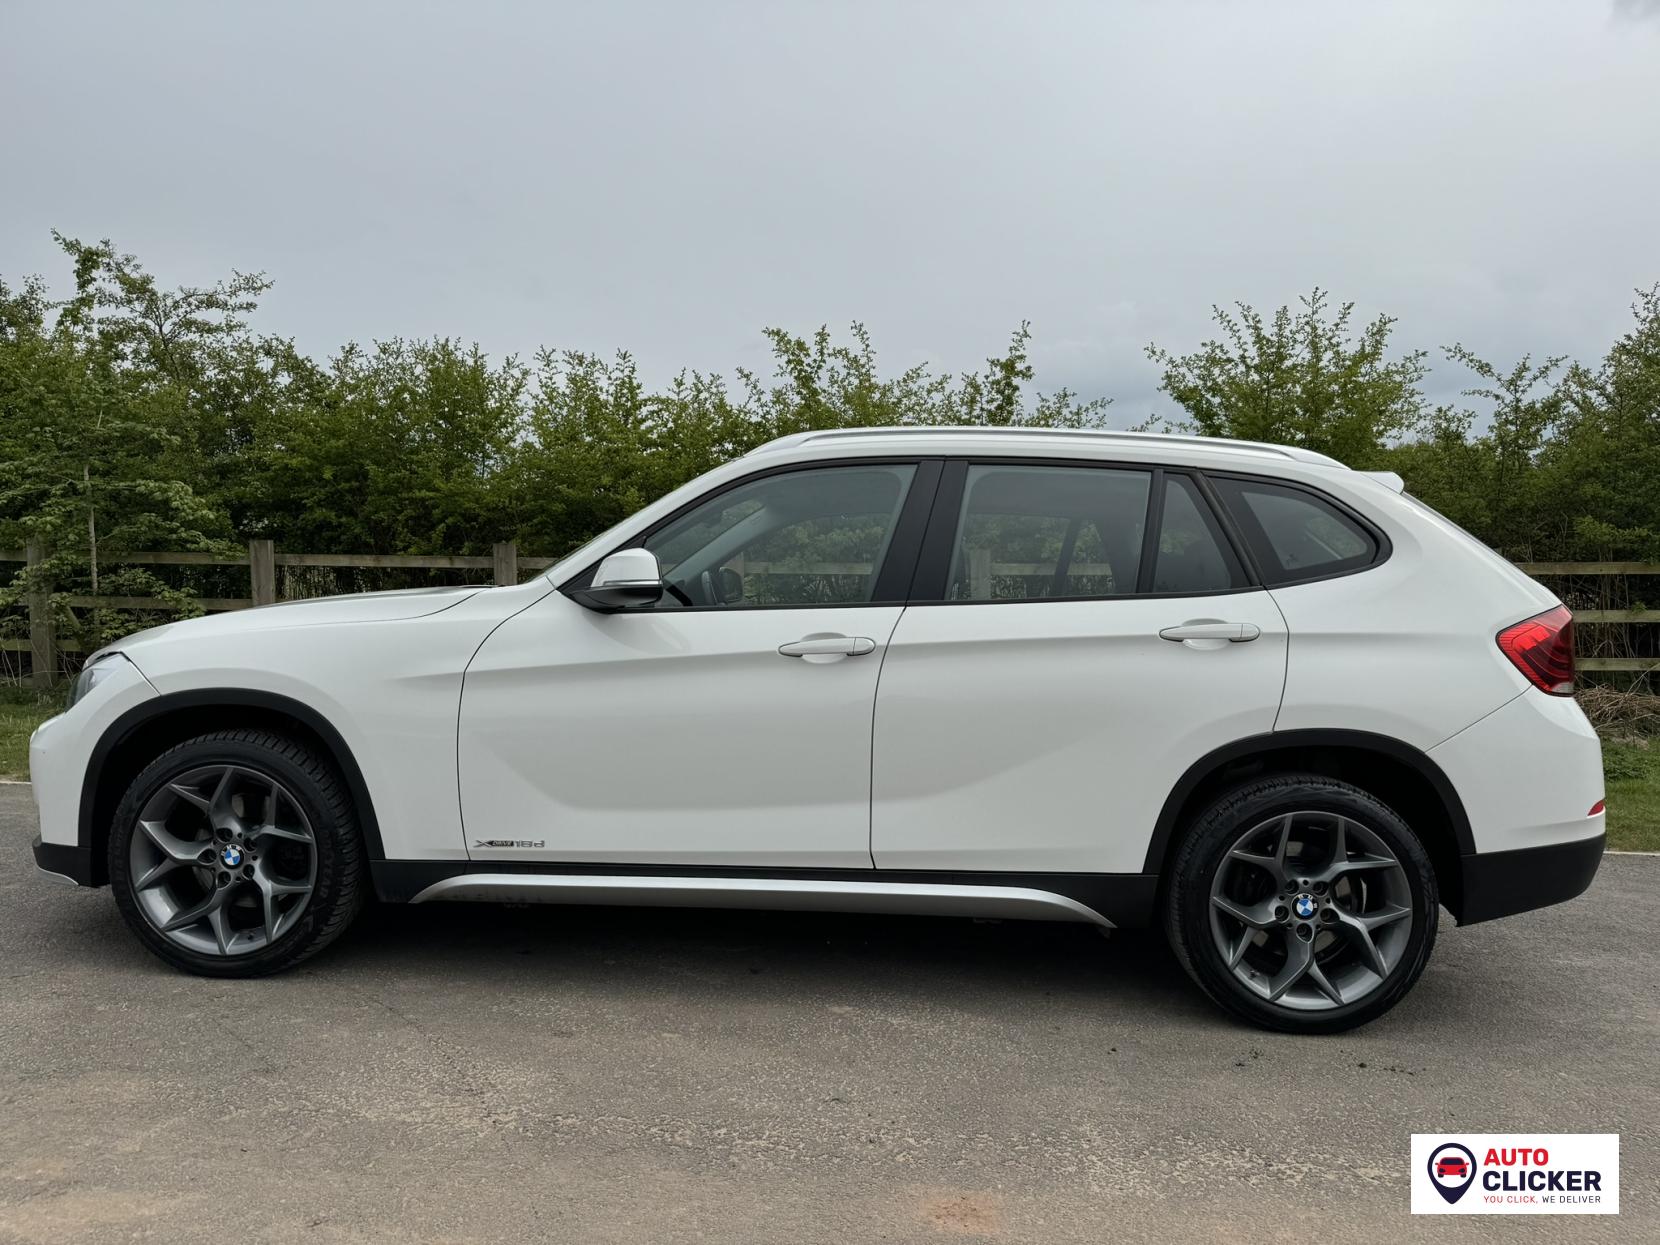 BMW X1 2.0 18d xLine SUV 5dr Diesel Manual xDrive Euro 5 (s/s) (143 ps)